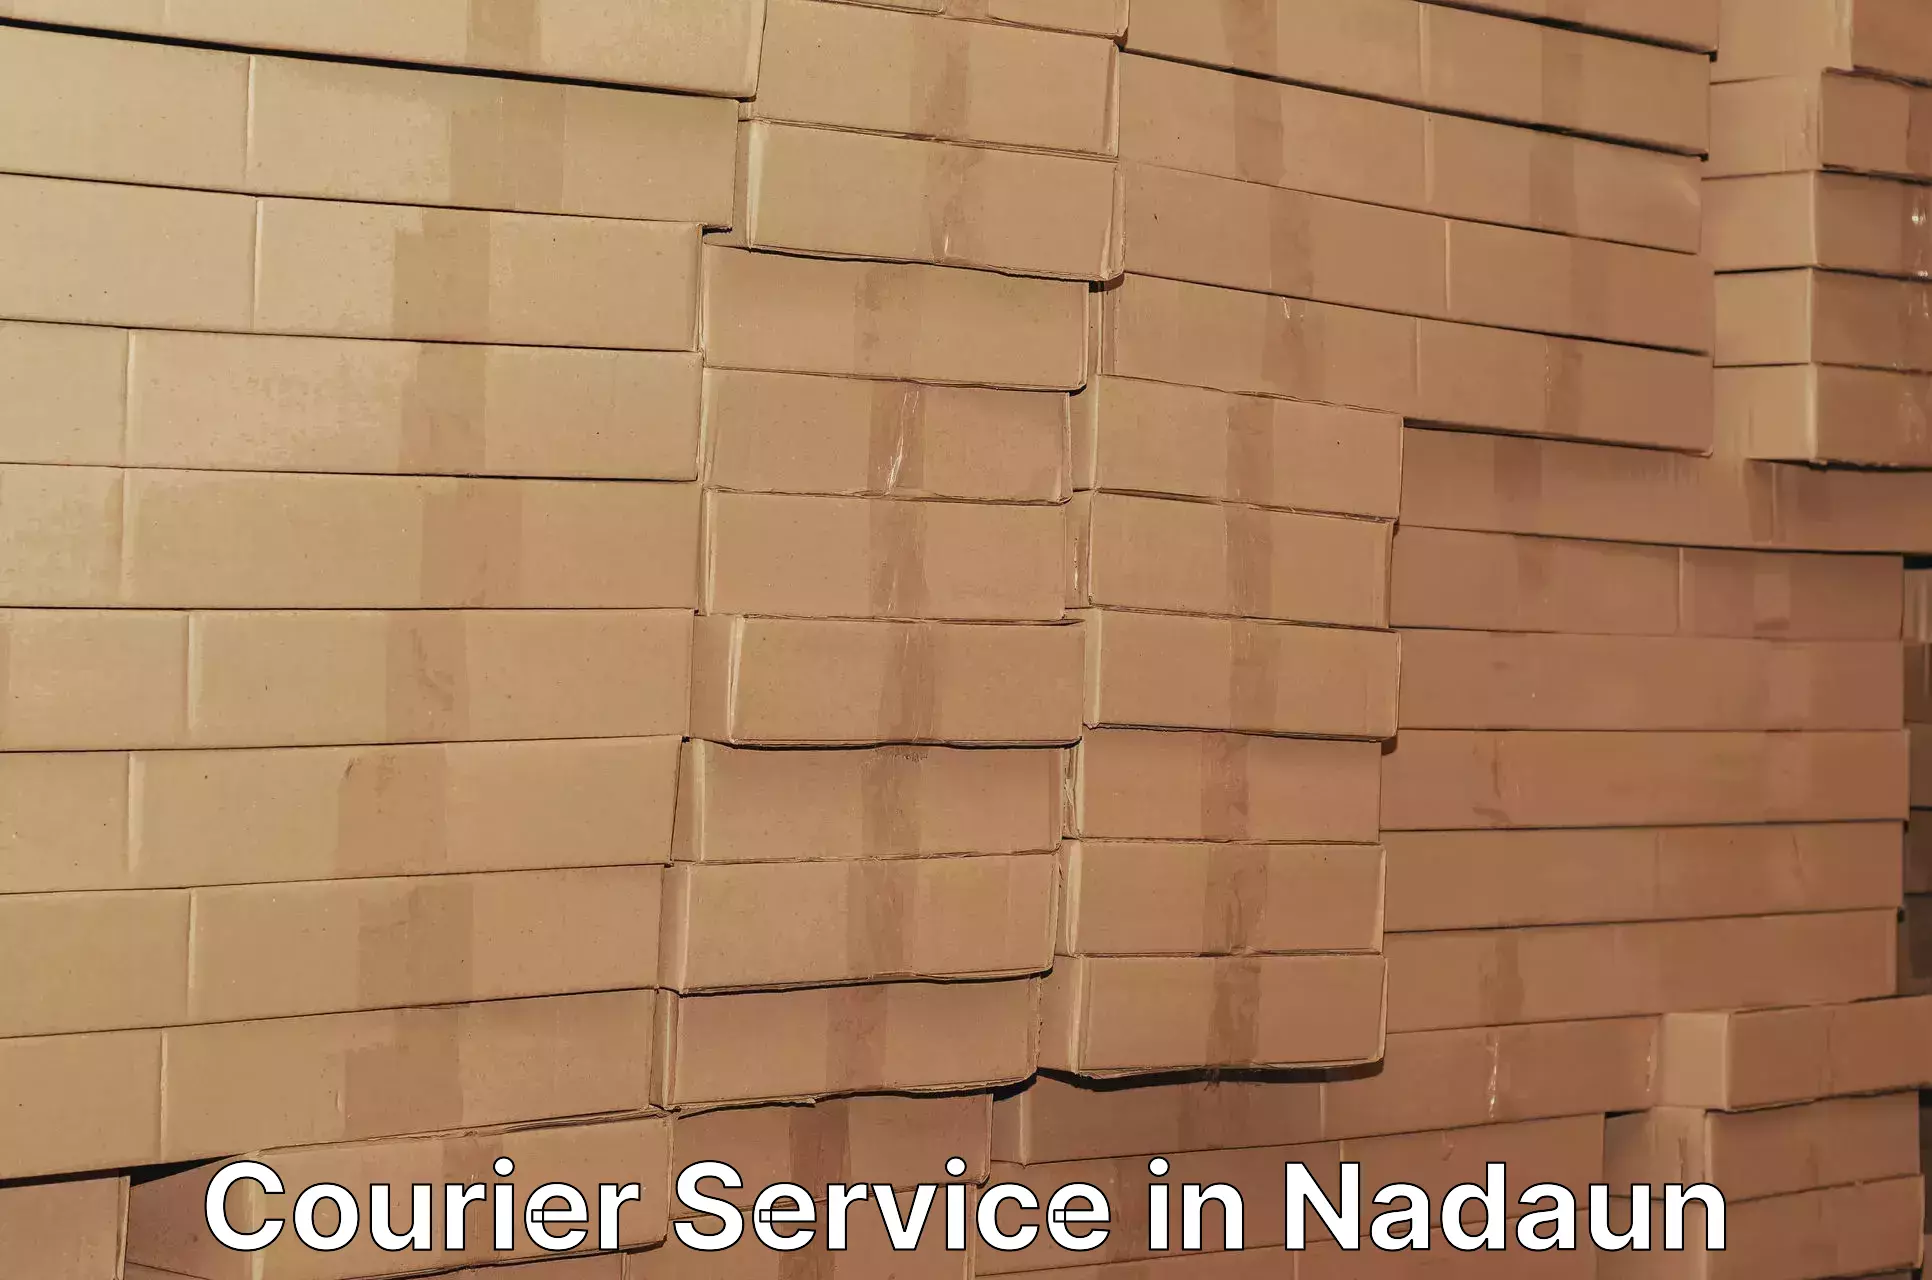 State-of-the-art courier technology in Nadaun